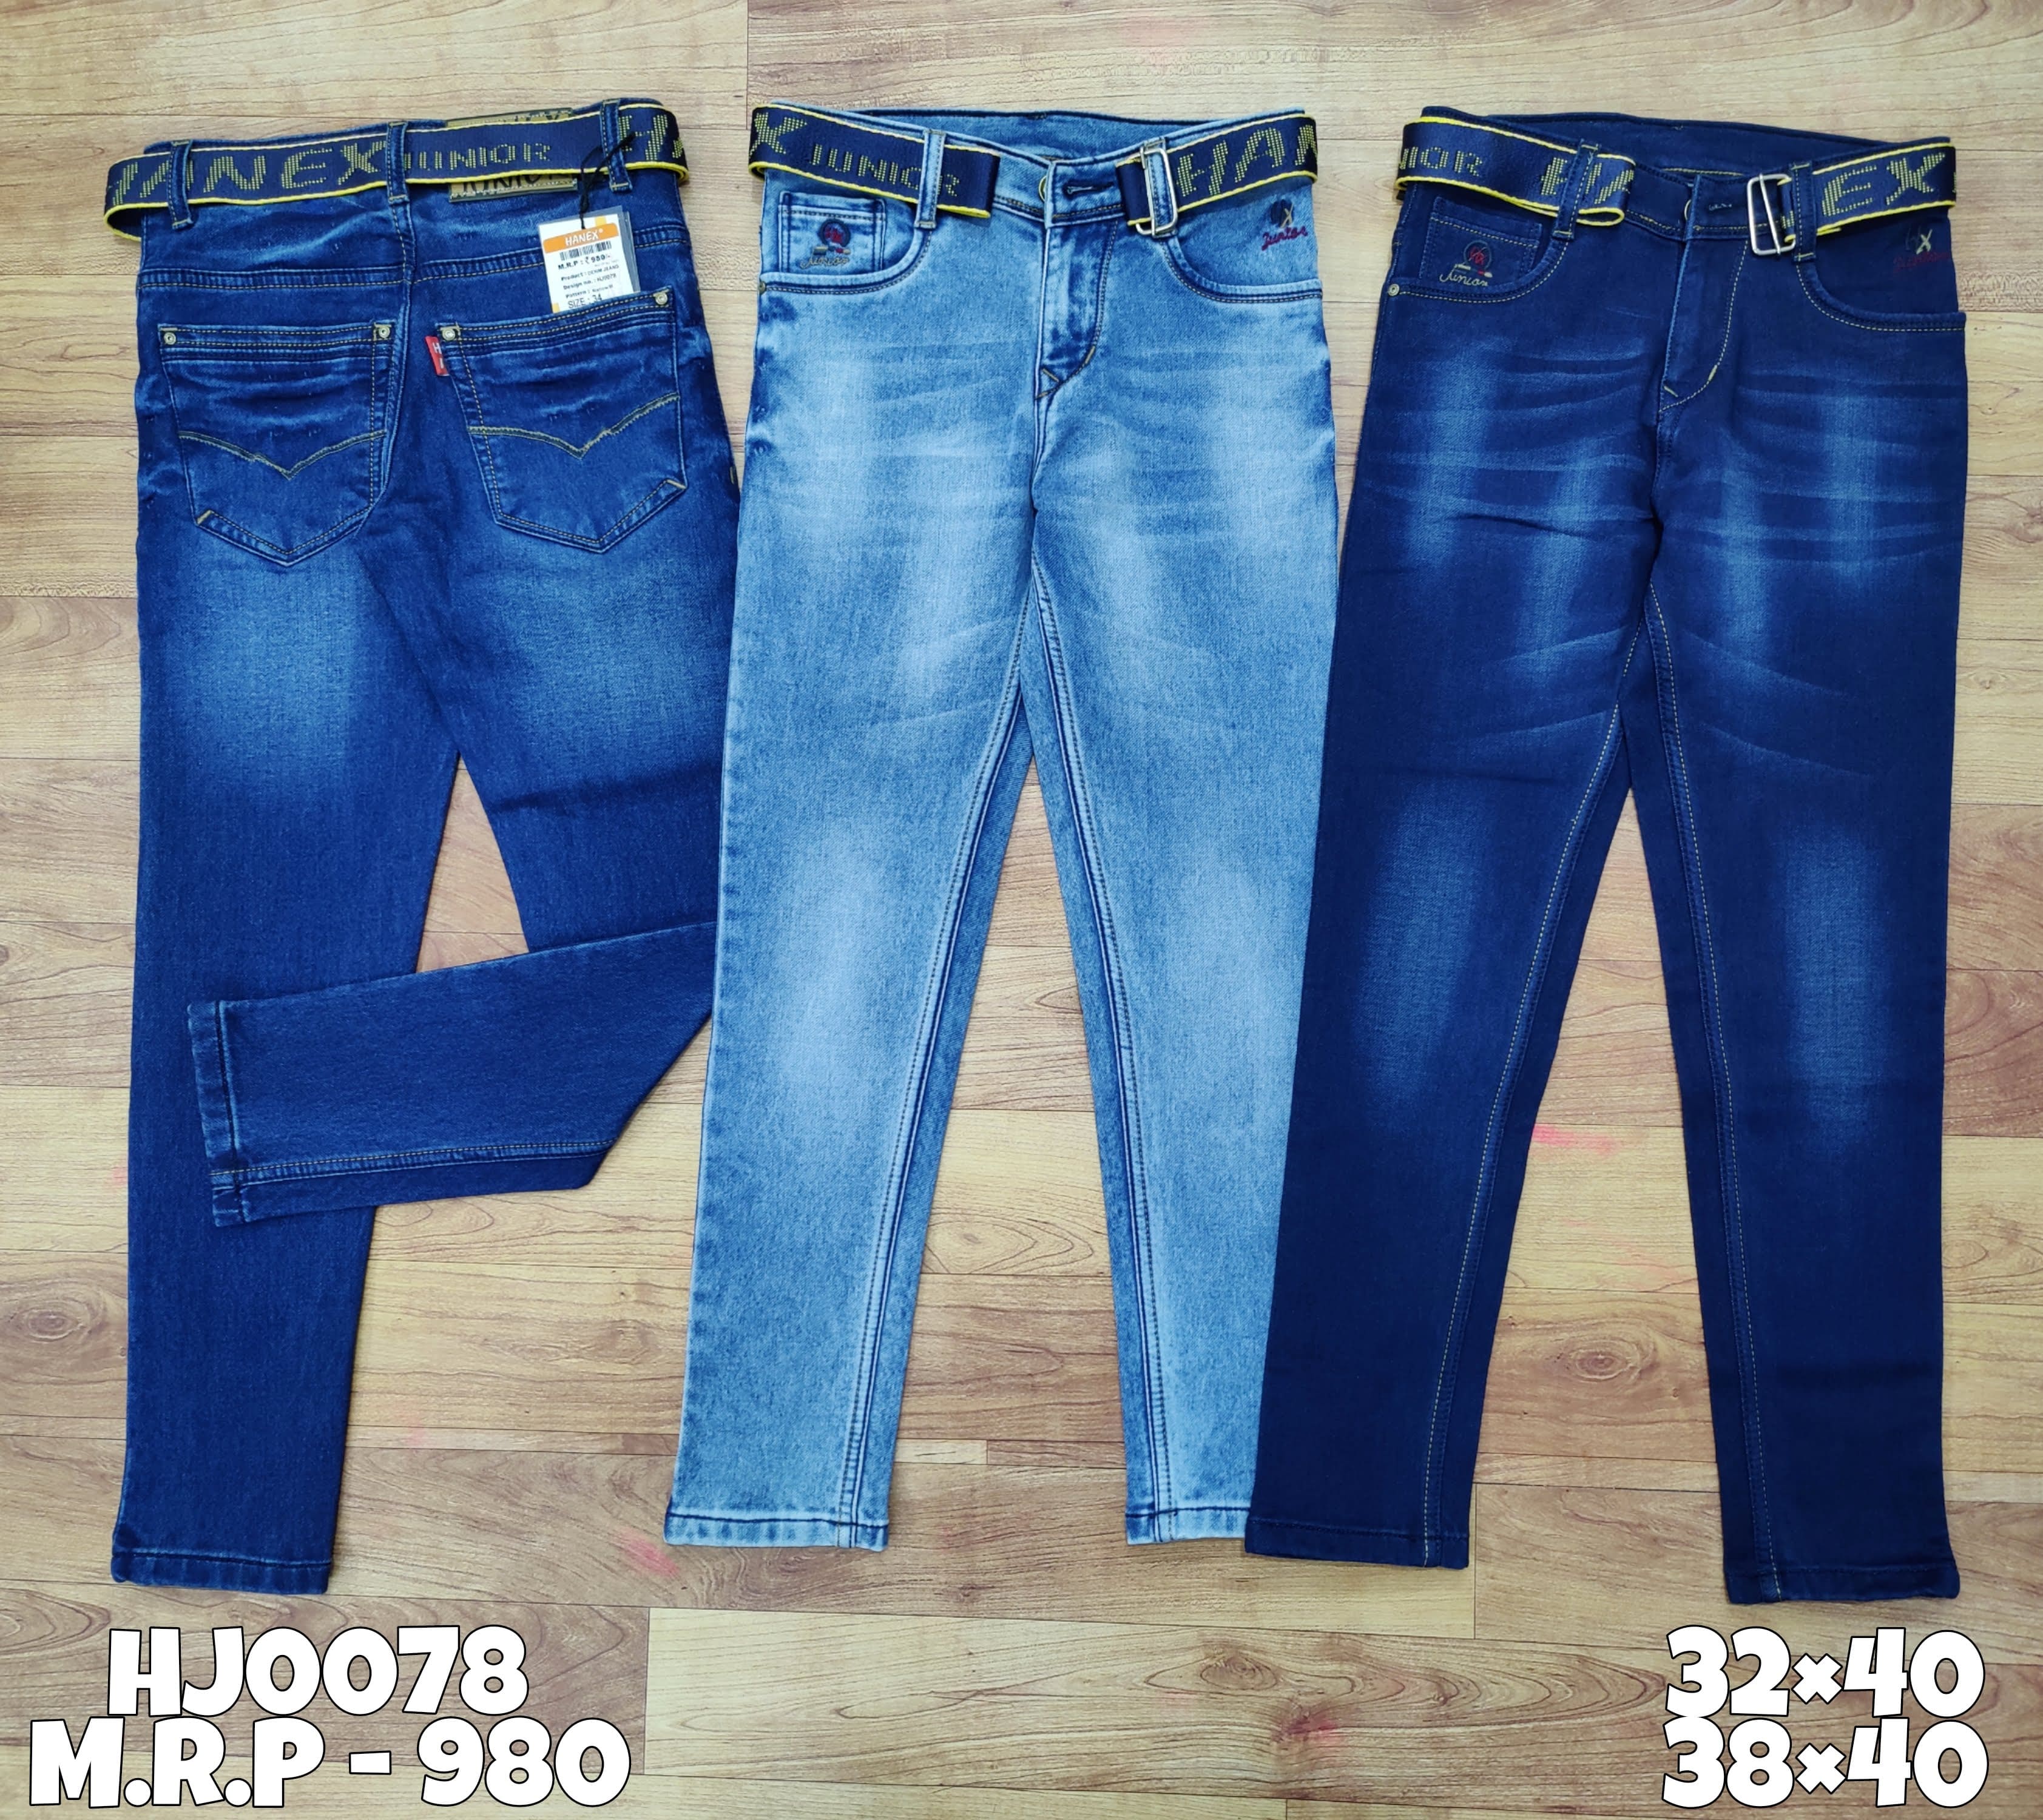 Women Ankle Length Jeans Manufacturers, Ankle Length Jeans Suppliers Delhi